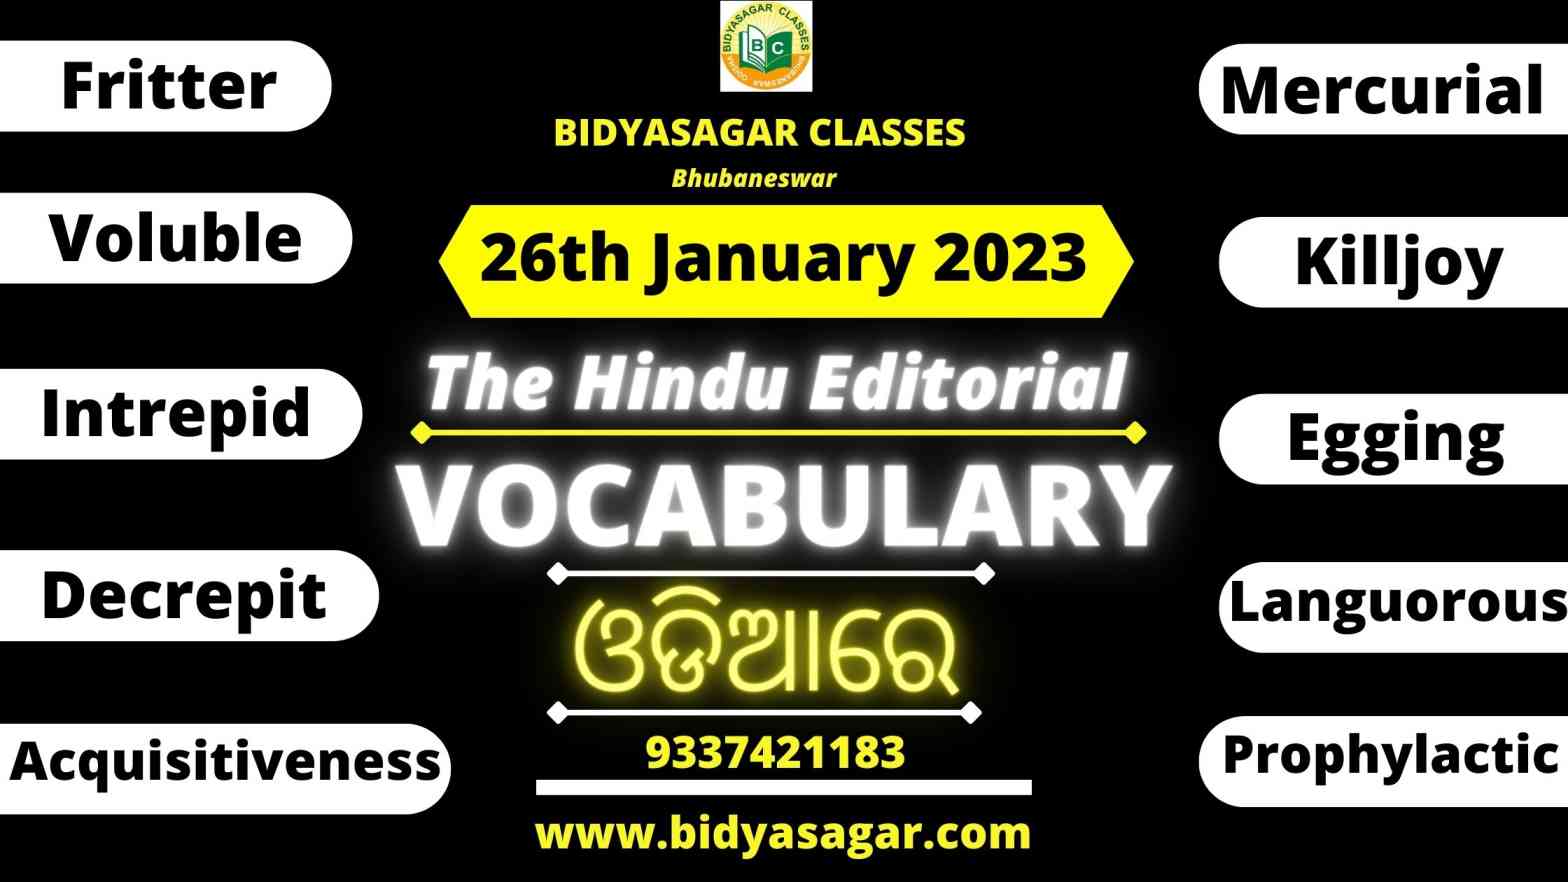 The Hindu Editorial Vocabulary of 26th January 2023